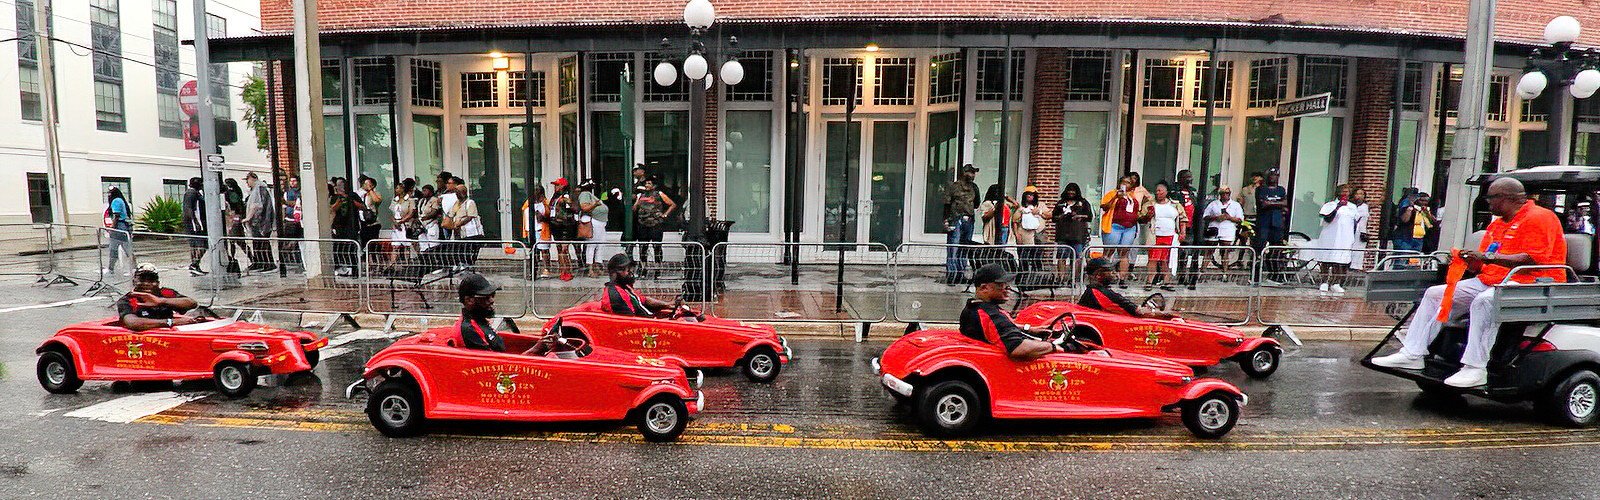 Members of the motor unit of the Nabbar Temple No. 128 from Atlanta, GA have fun with their tiny red cars, a particularity that distinguishes them as Shriners.